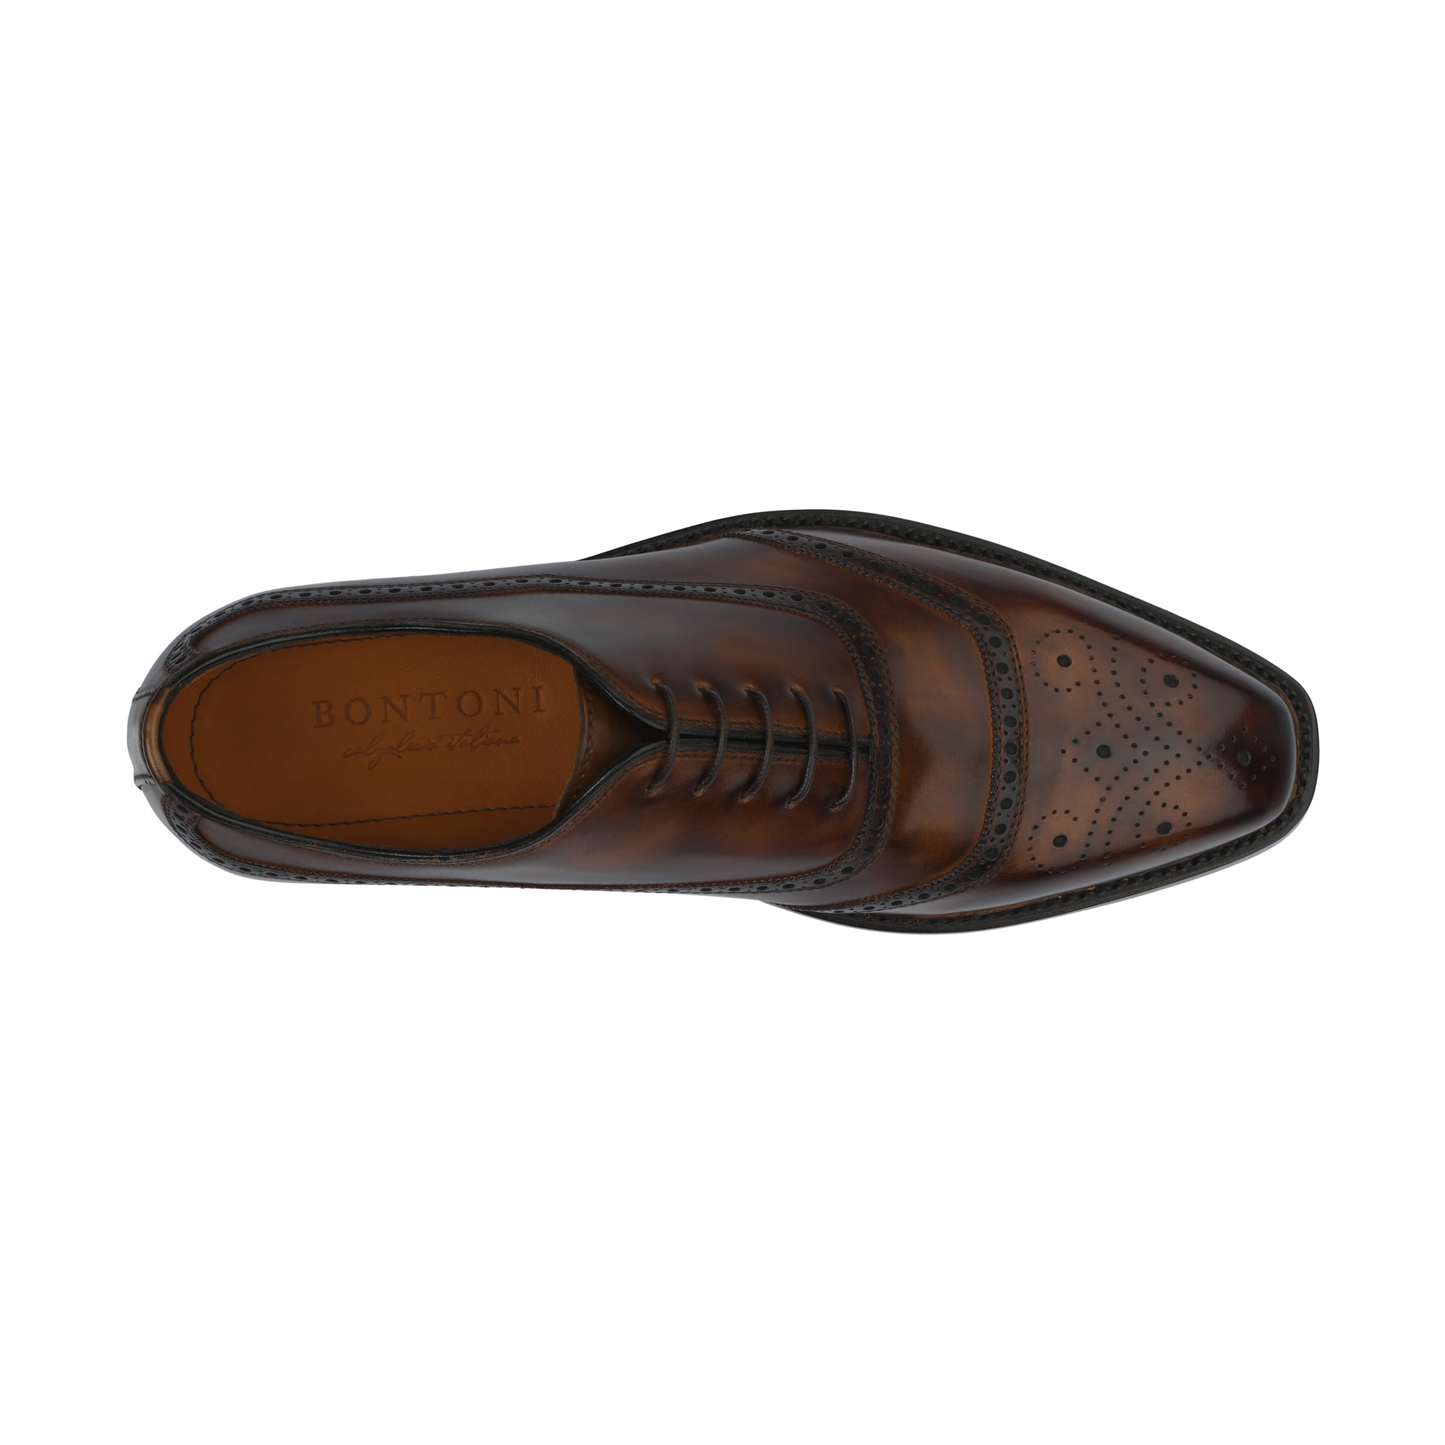 Bontoni «Tiziano» Five-Eyelet Oxford with Perforated Details and Medallion - SARTALE